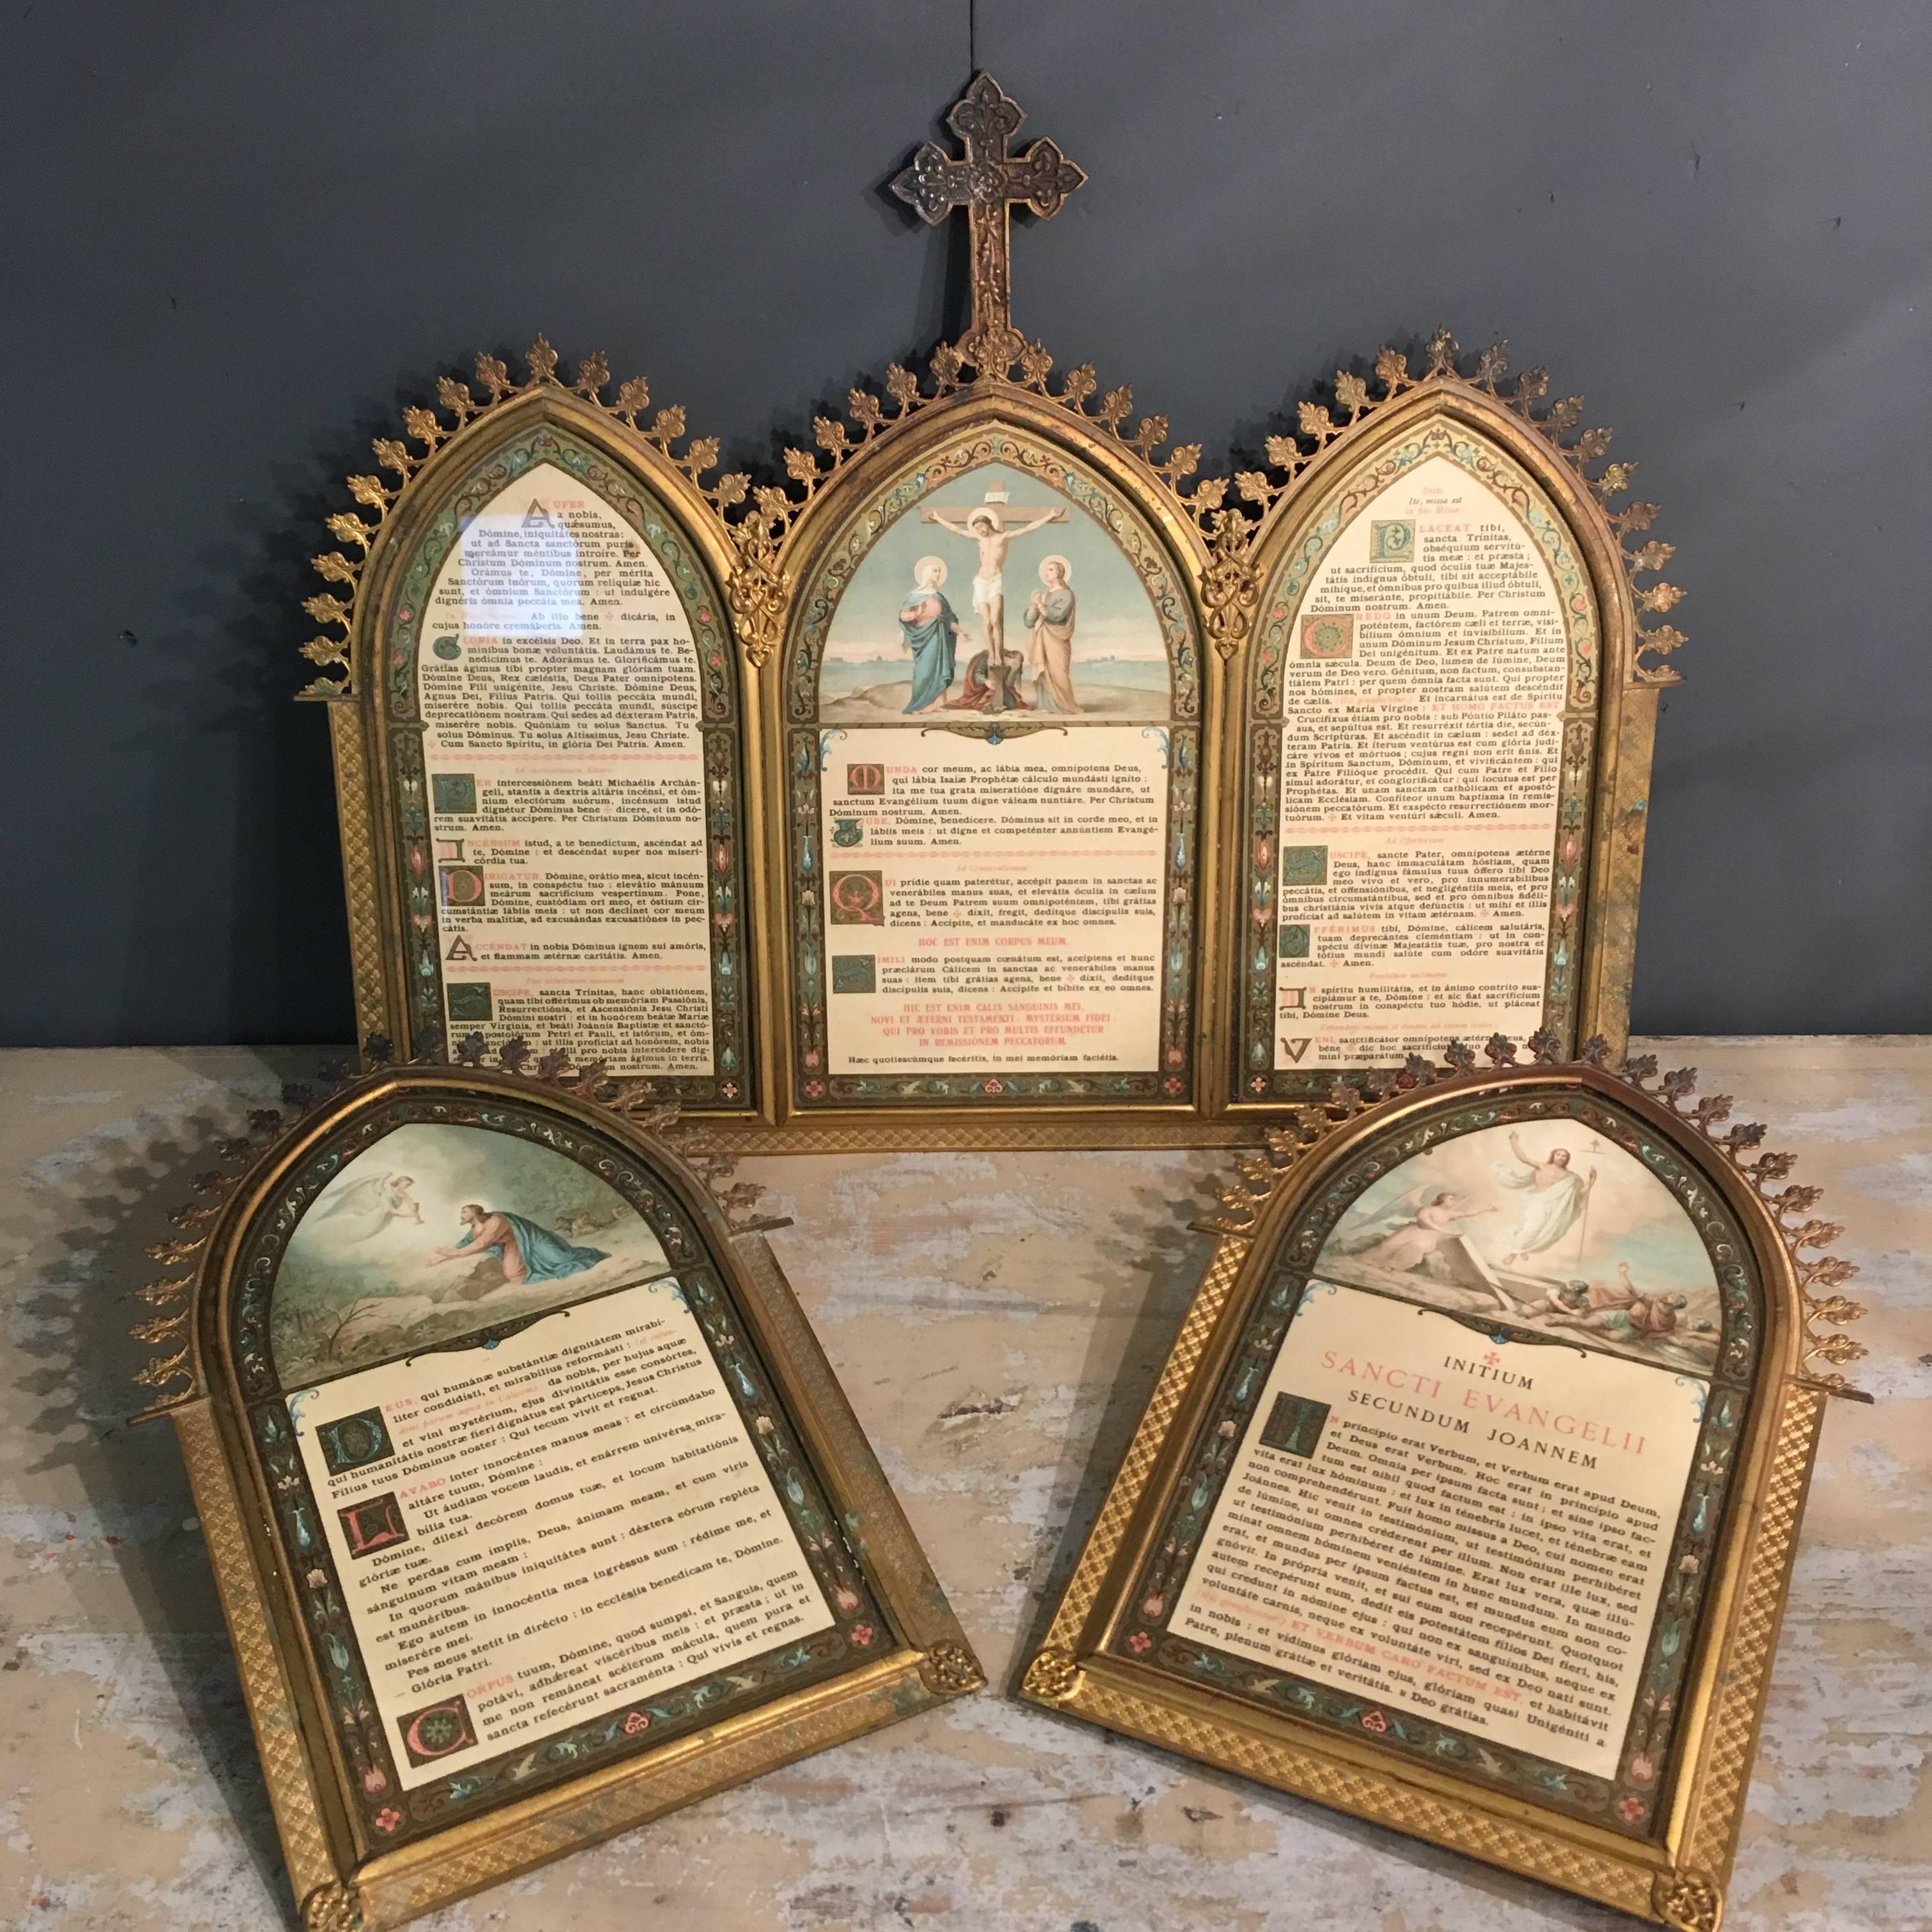 Set of Latin mass altar cards, these would have been used by the priest at mass.

Brass frames with highly decorative shaping and pattern, central frame has a decorative cross at the top

A rare opportunity to find a set of five cards still